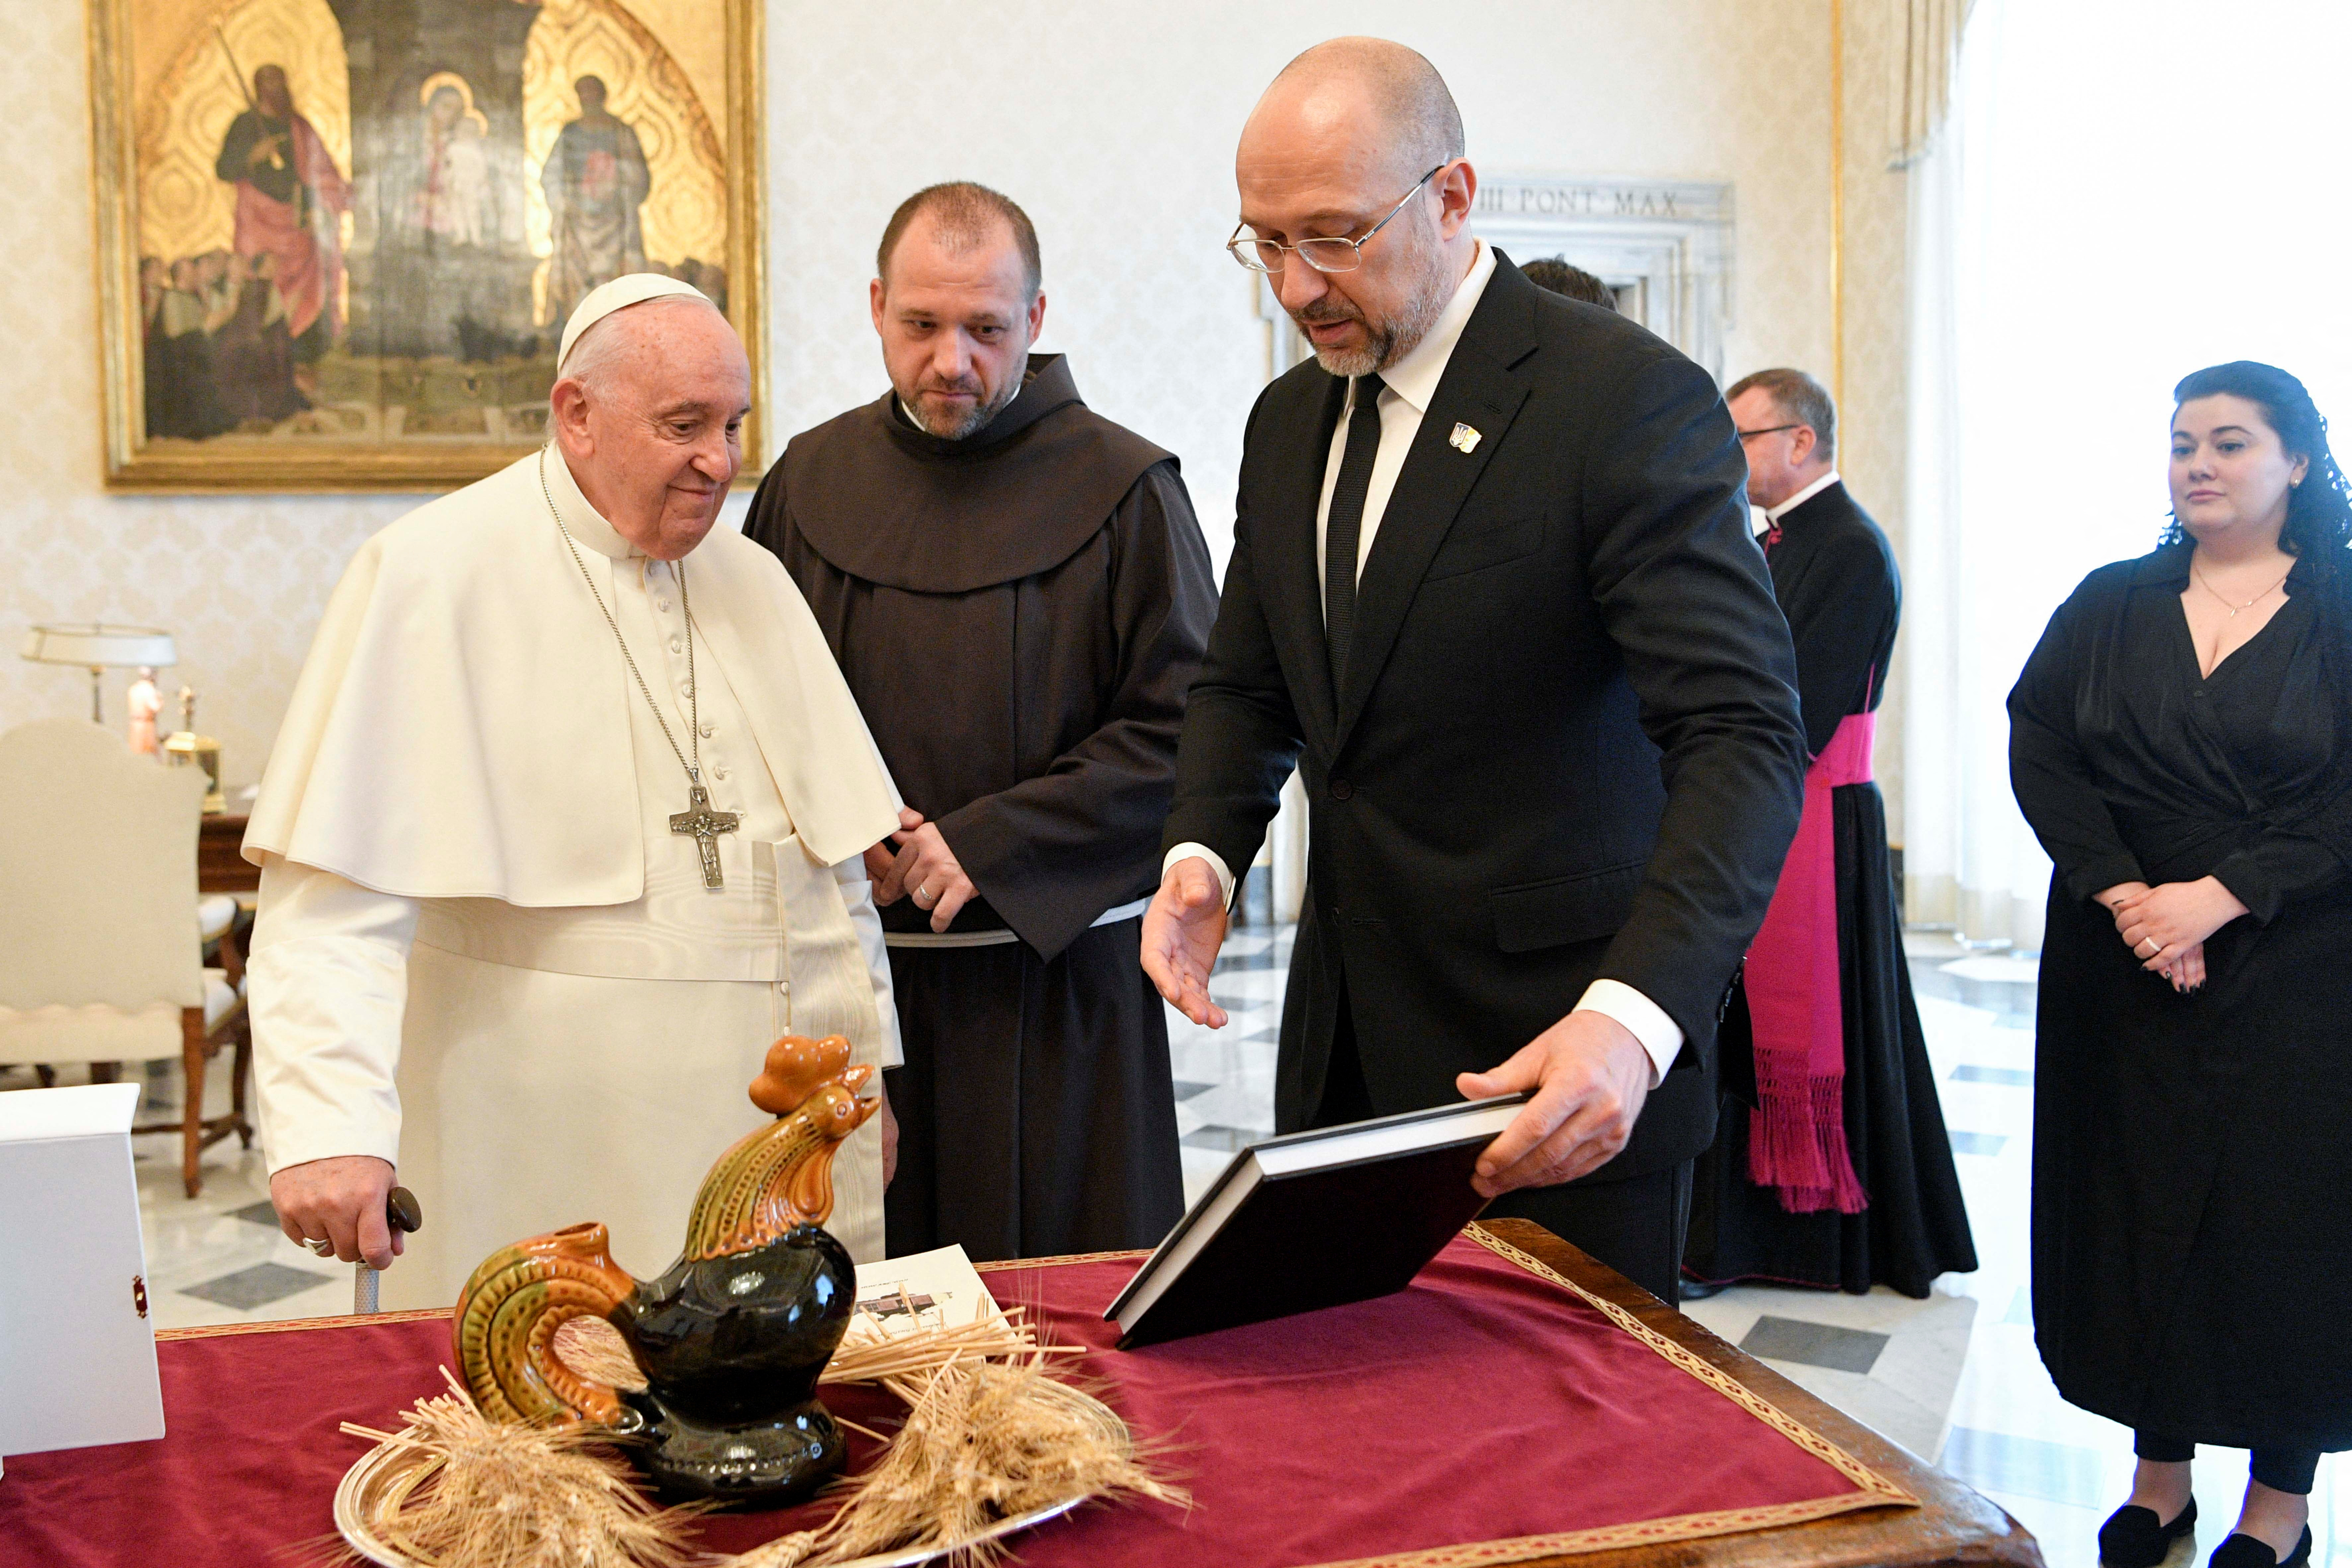 The prime minister presented the pontiff with a reproduction of a ceramic jug depicting a rooster, which was found in a house near Kiev after a bombing raid, and also offered a photo book about the ongoing war and the resistance of the Ukrainian people ( Vatican Media/REUTERS)